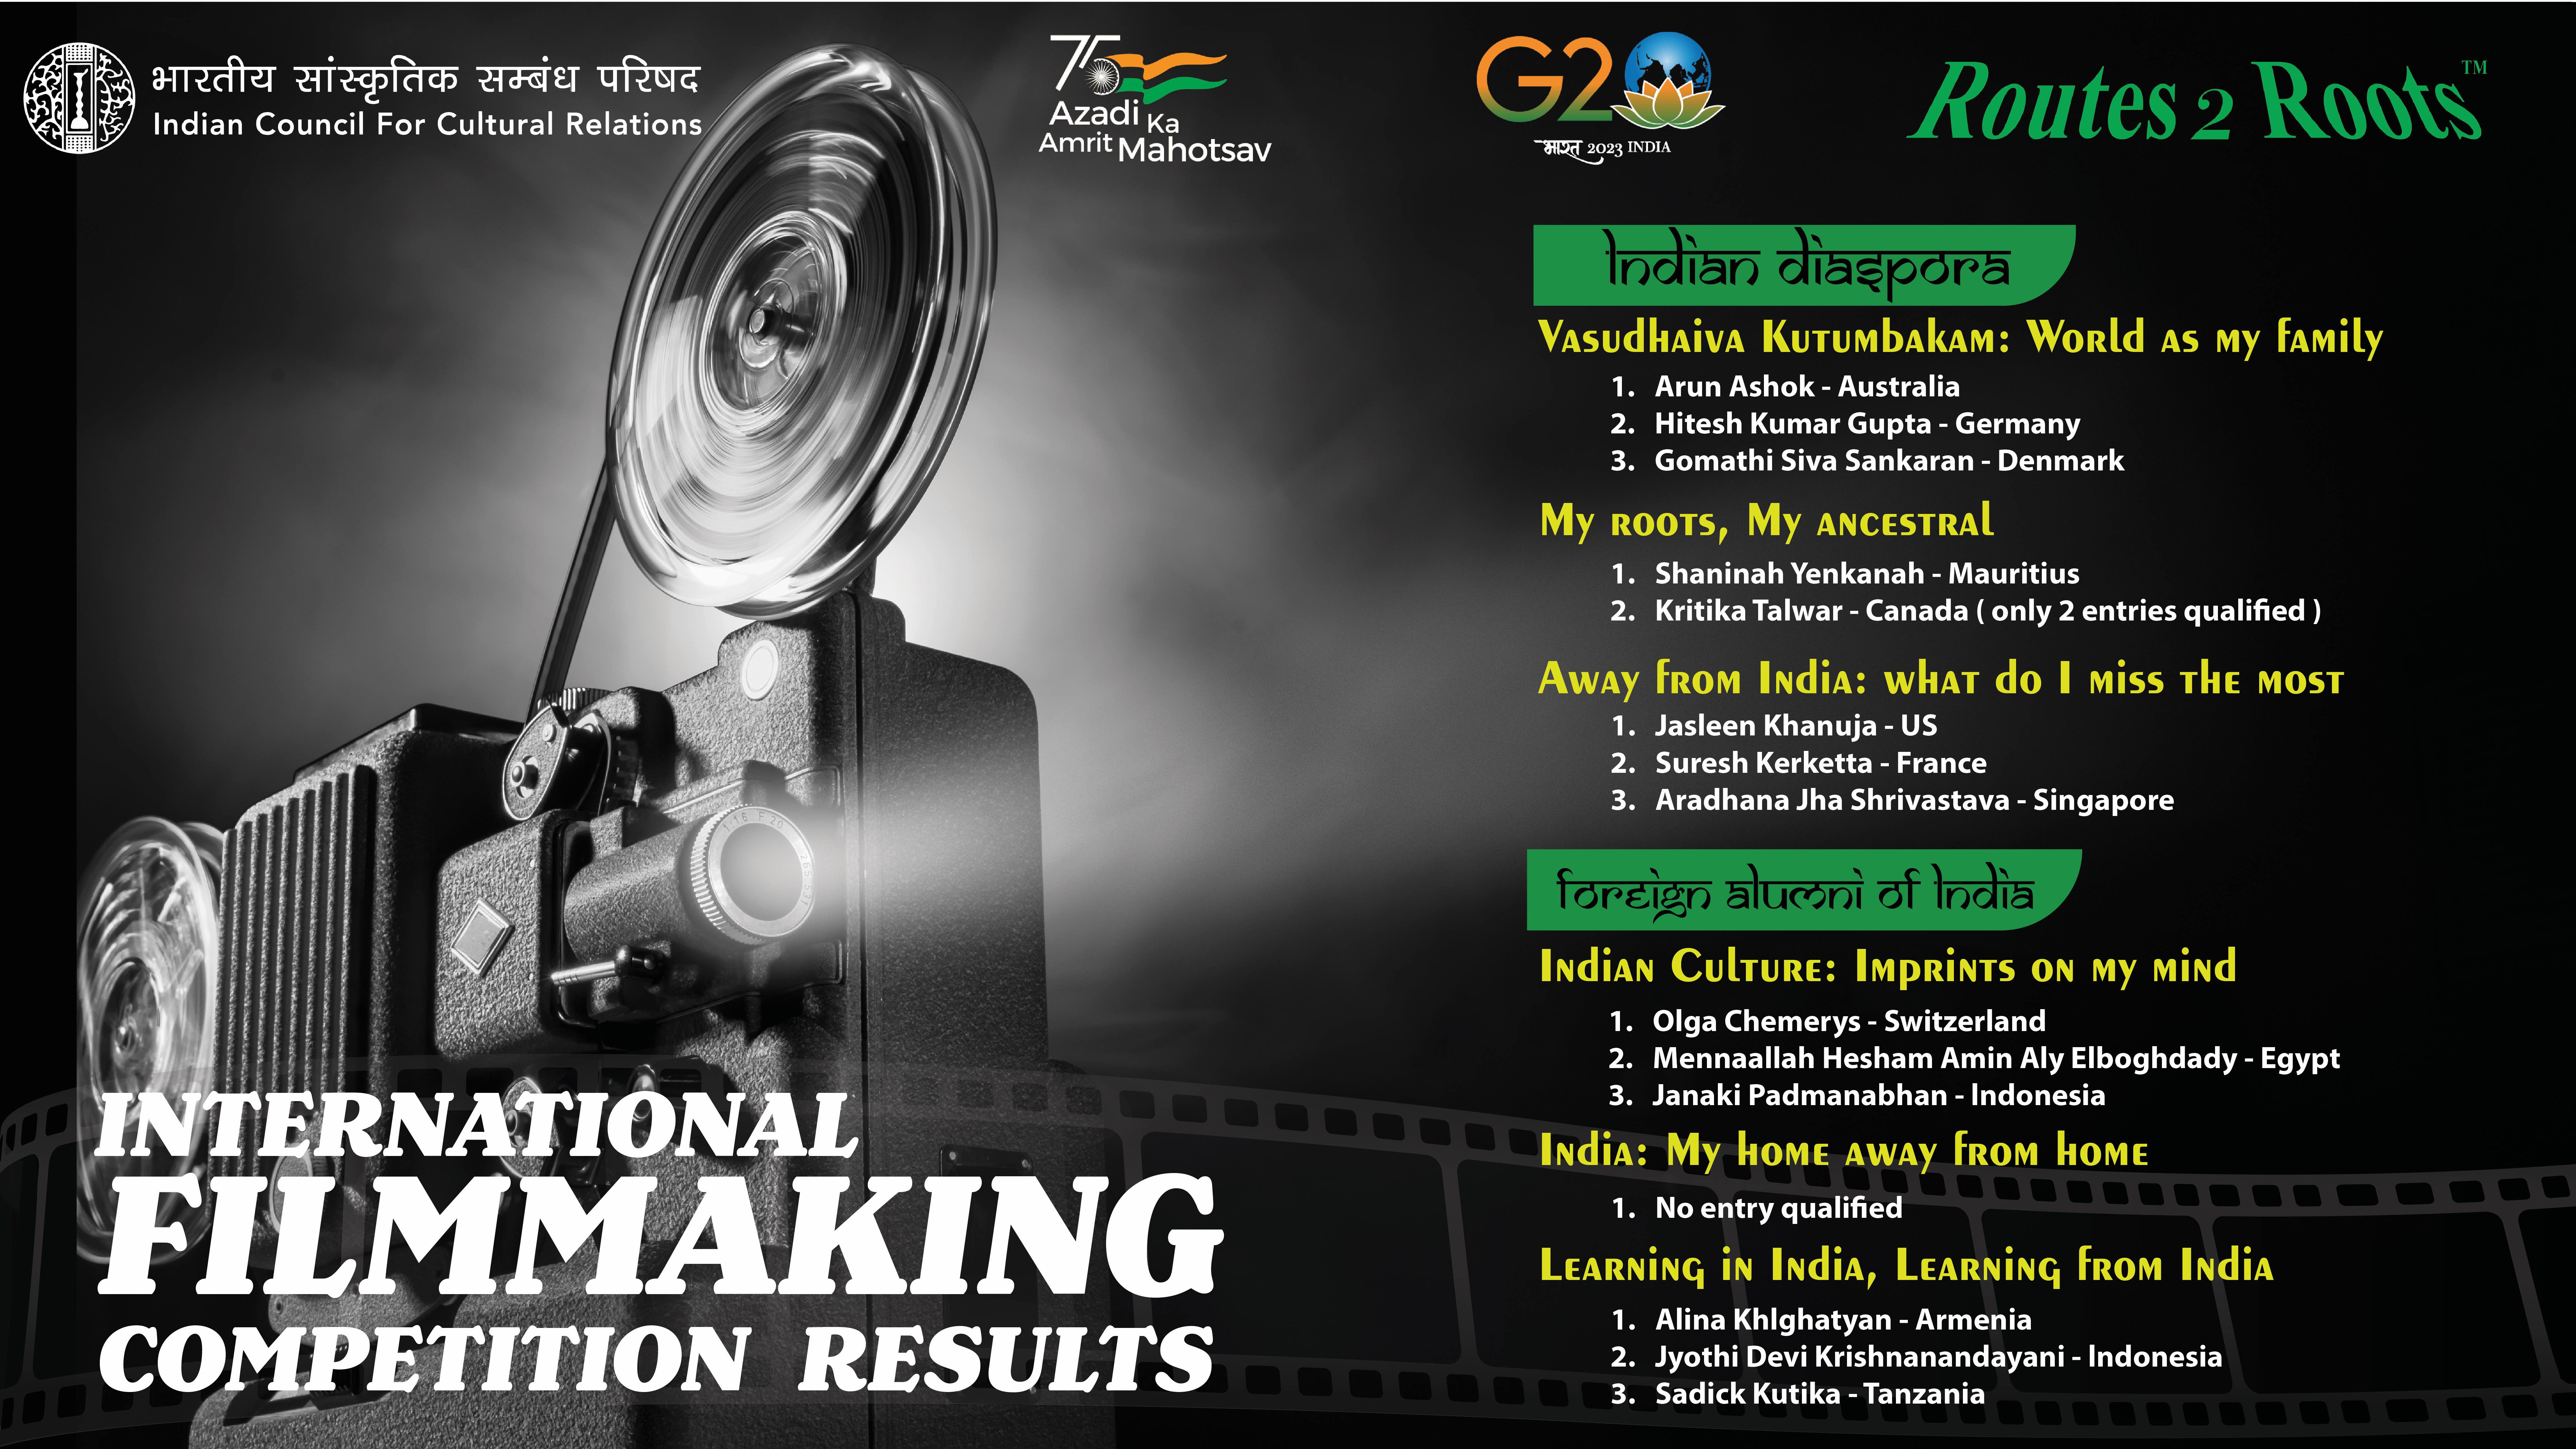 INTERNATIONAL FILMMAKING COMPETITION RESULTS